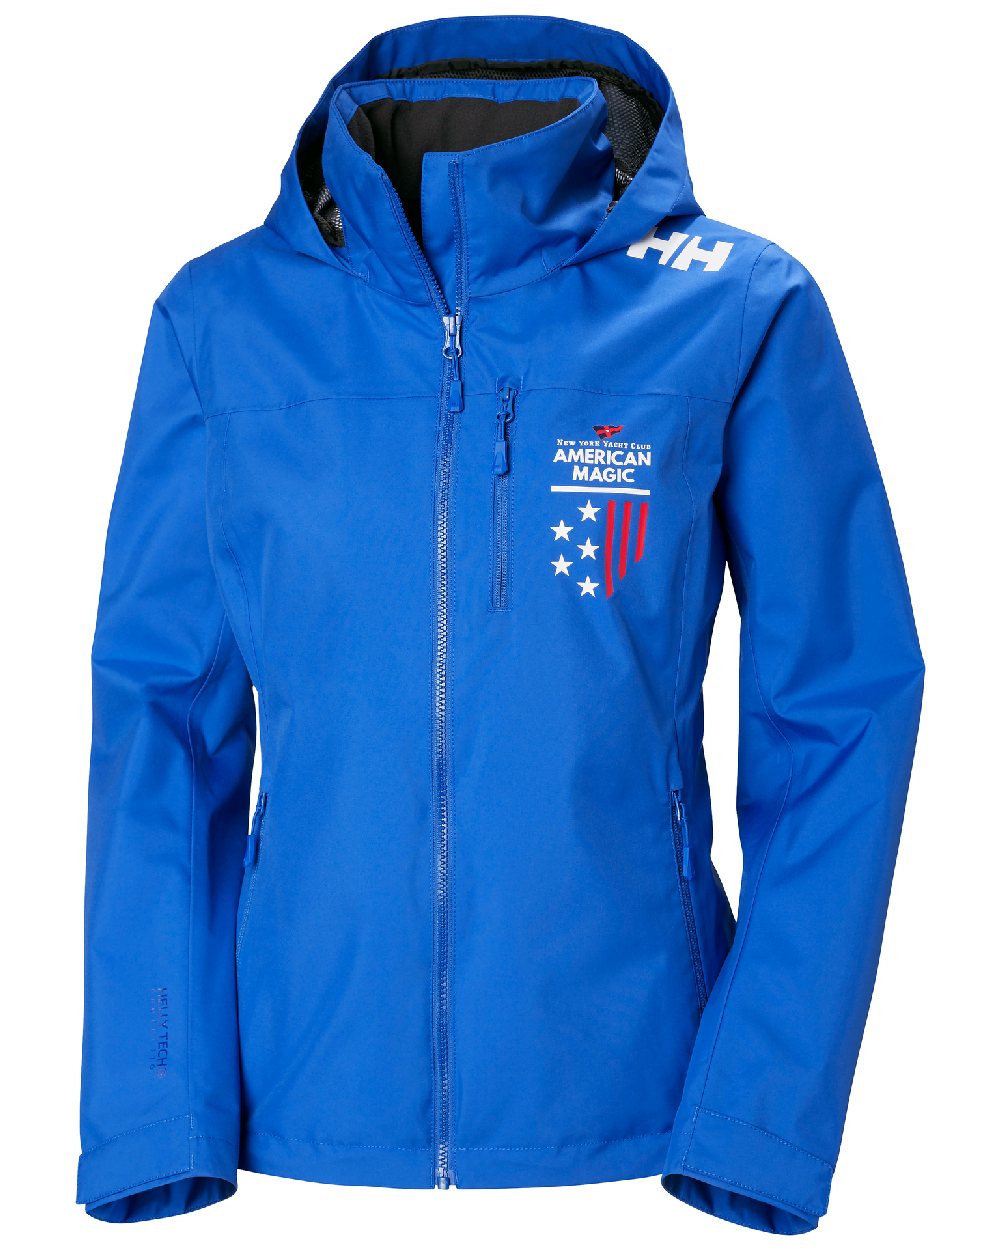 Cobalt 2.0 coloured Helly Hansen Womens American Magic Crew Hooded Jacket 2.0 on white background 